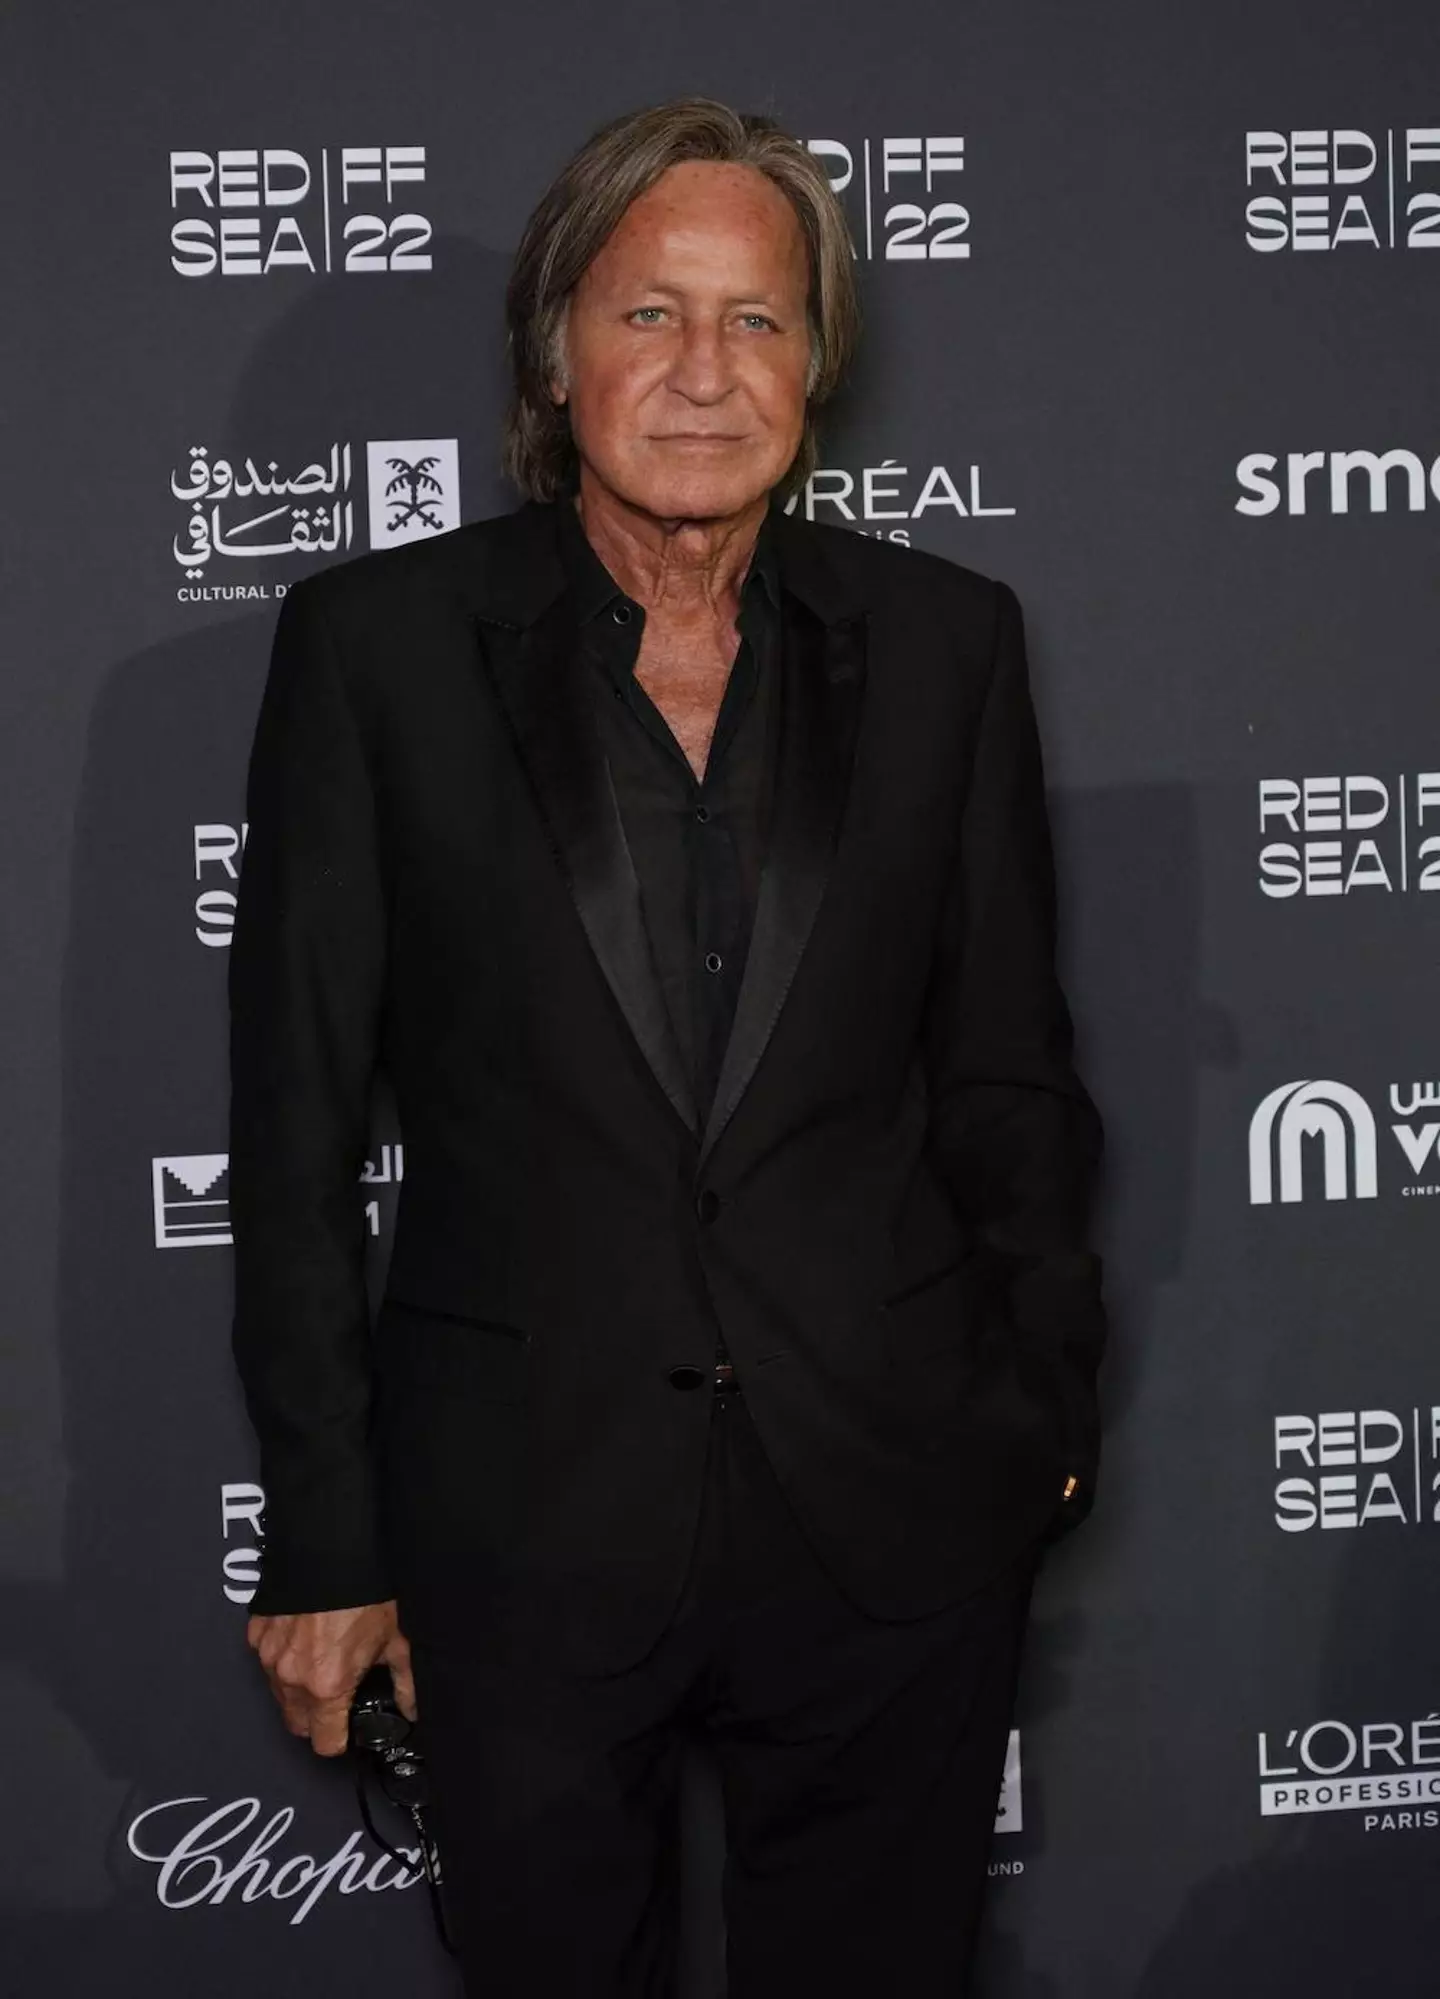 Mohamed Hadid was also in the running to be named 'Antisemite of the Year'.